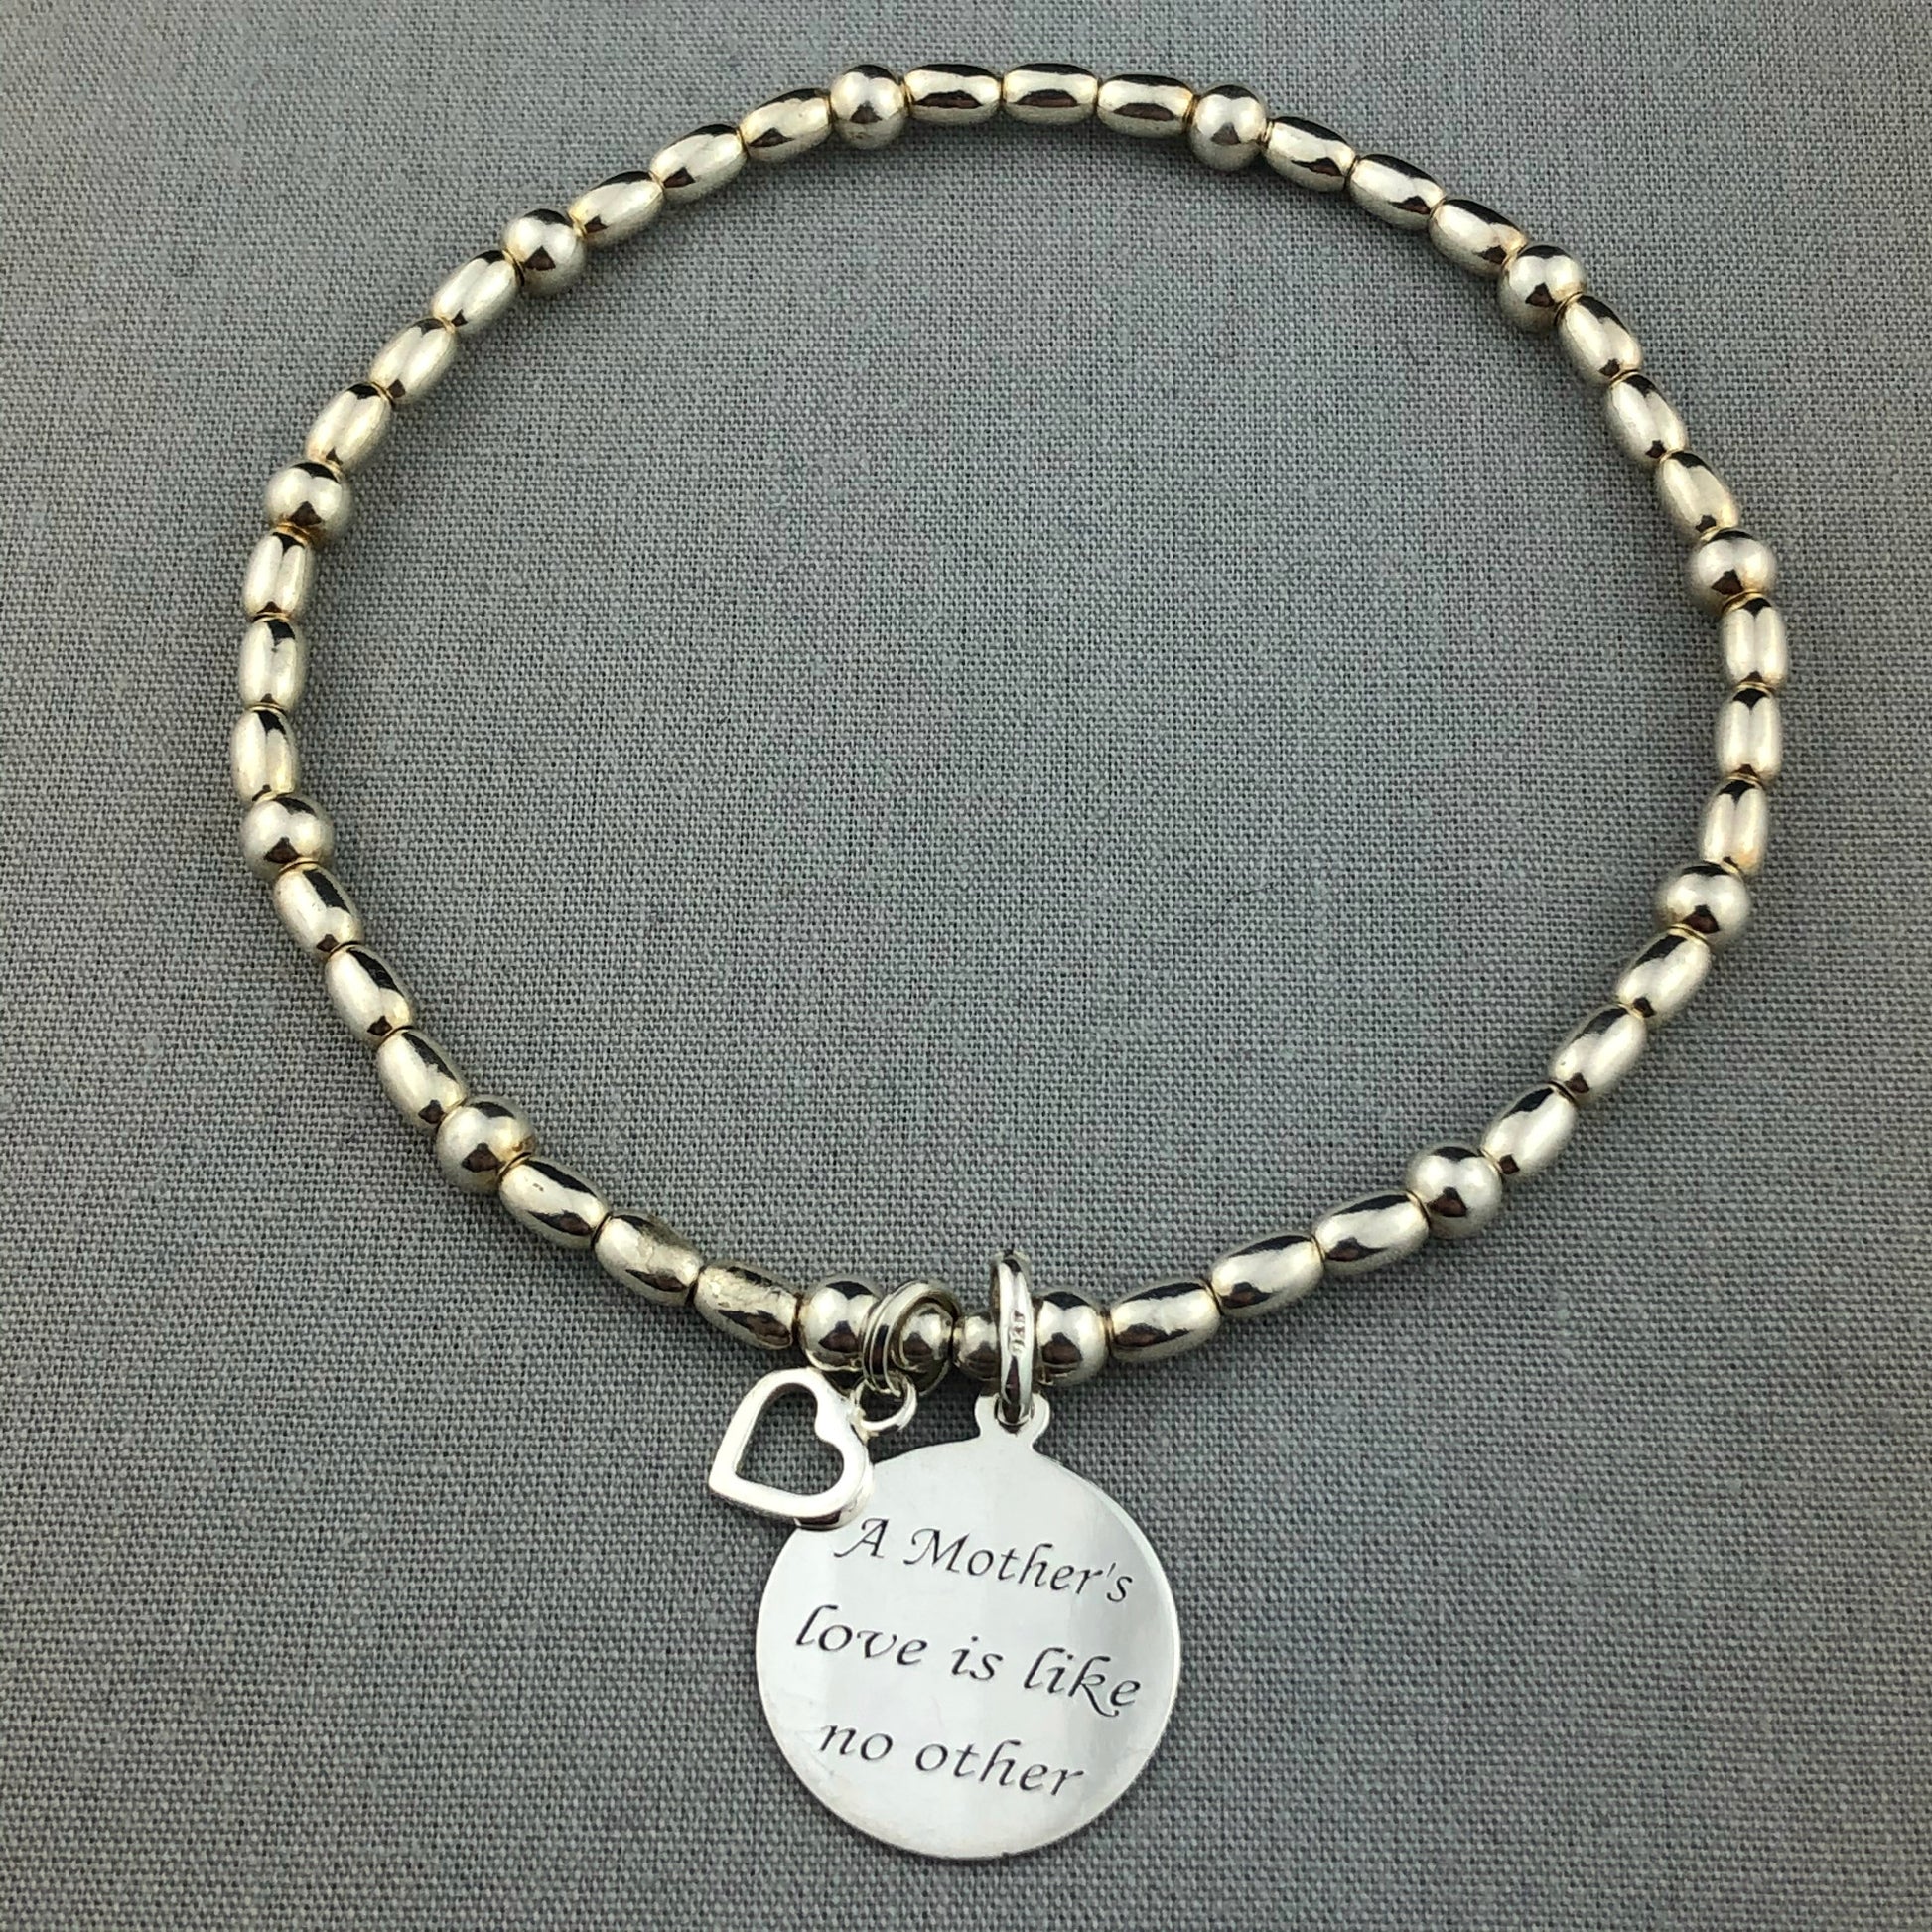 "Mother's Love is Like No Other" sterling silver hand-made women's stacking charm bracelet by My Silver Wish